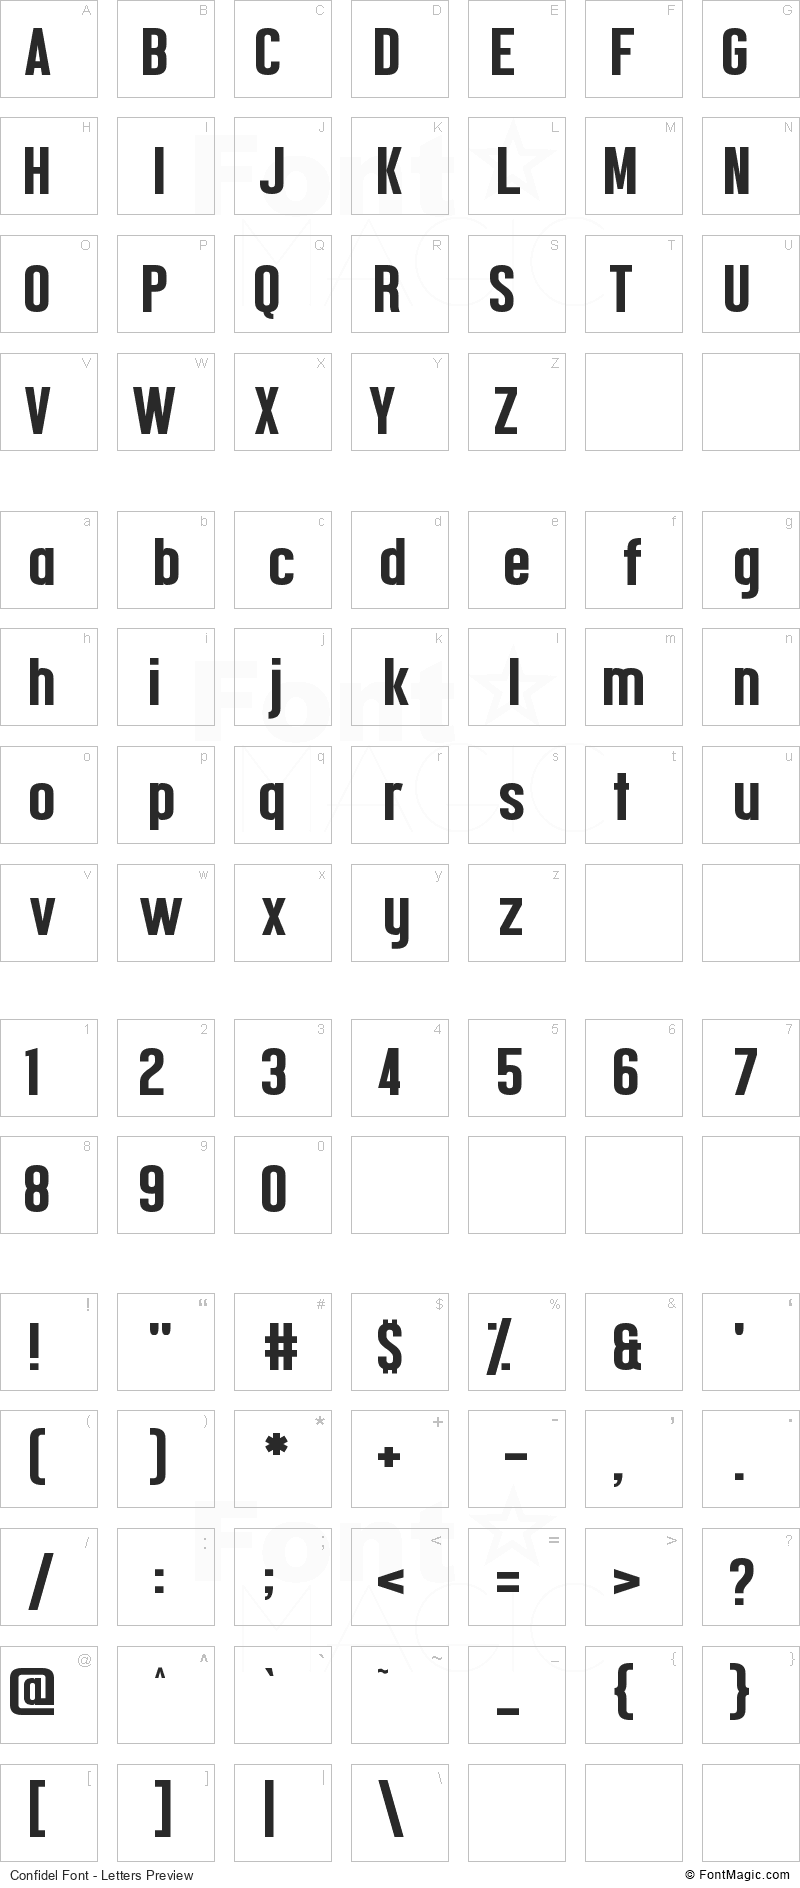 Confidel Font - All Latters Preview Chart